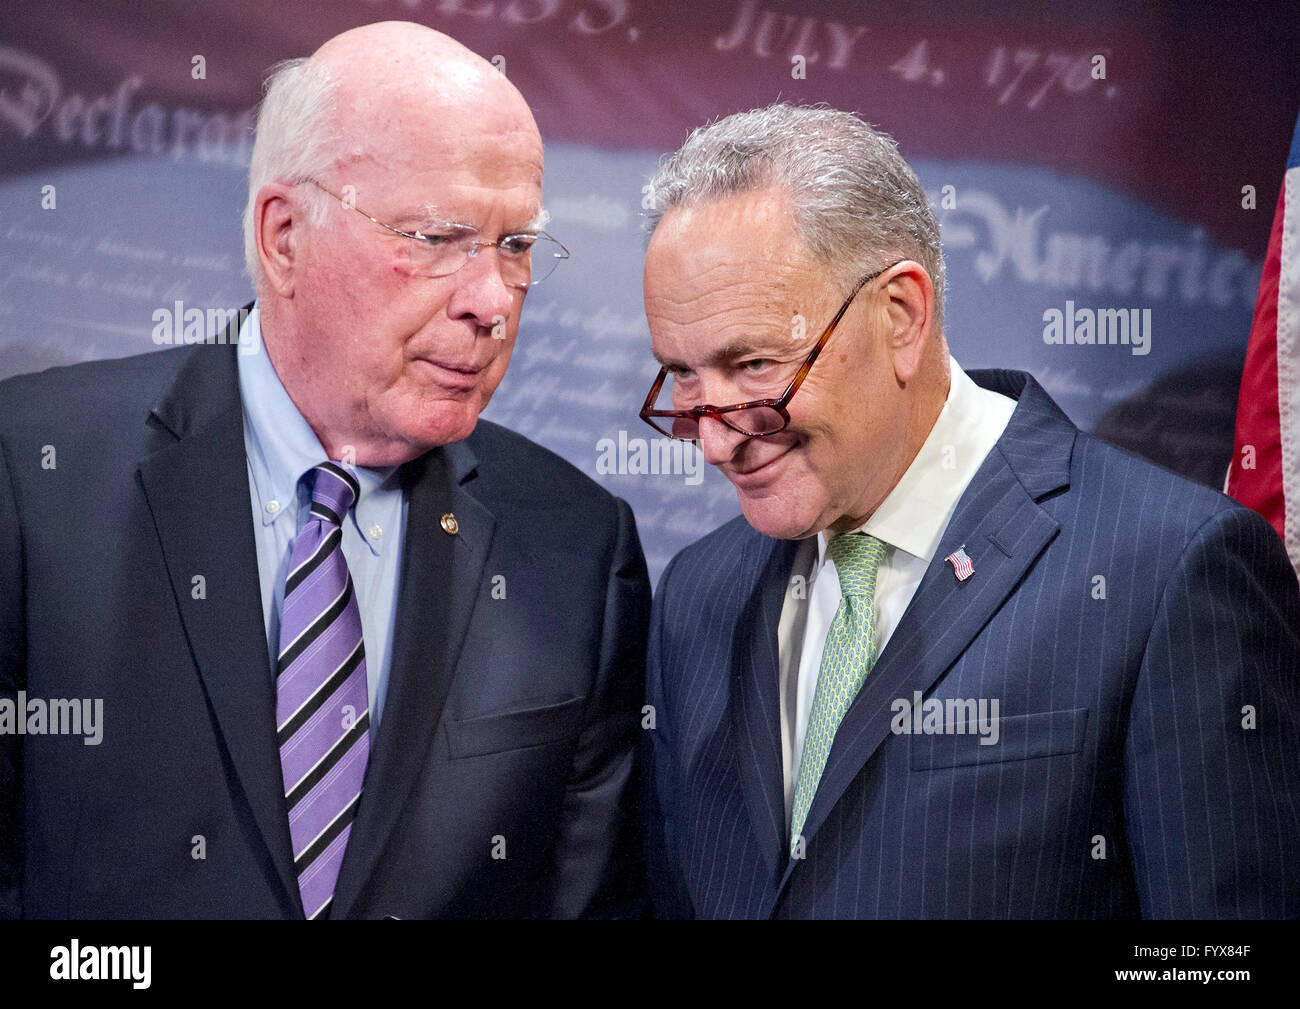 United States Senators Patrick Leahy (Democrat of Vermont), left, and Chuck Schumer (Democrat of New York), right, speak to one another during a press conference calling on the US Senate Republican leadership to bring to the floor the bipartisan Sentencing Reform and Corrections Act, a bill to reduce some mandatory minimum sentences and apply those changes retroactively to inmates currently serving unfair sentences. Credit: Ron Sachs/CNP - NO WIRE SERVICE - Stock Photo